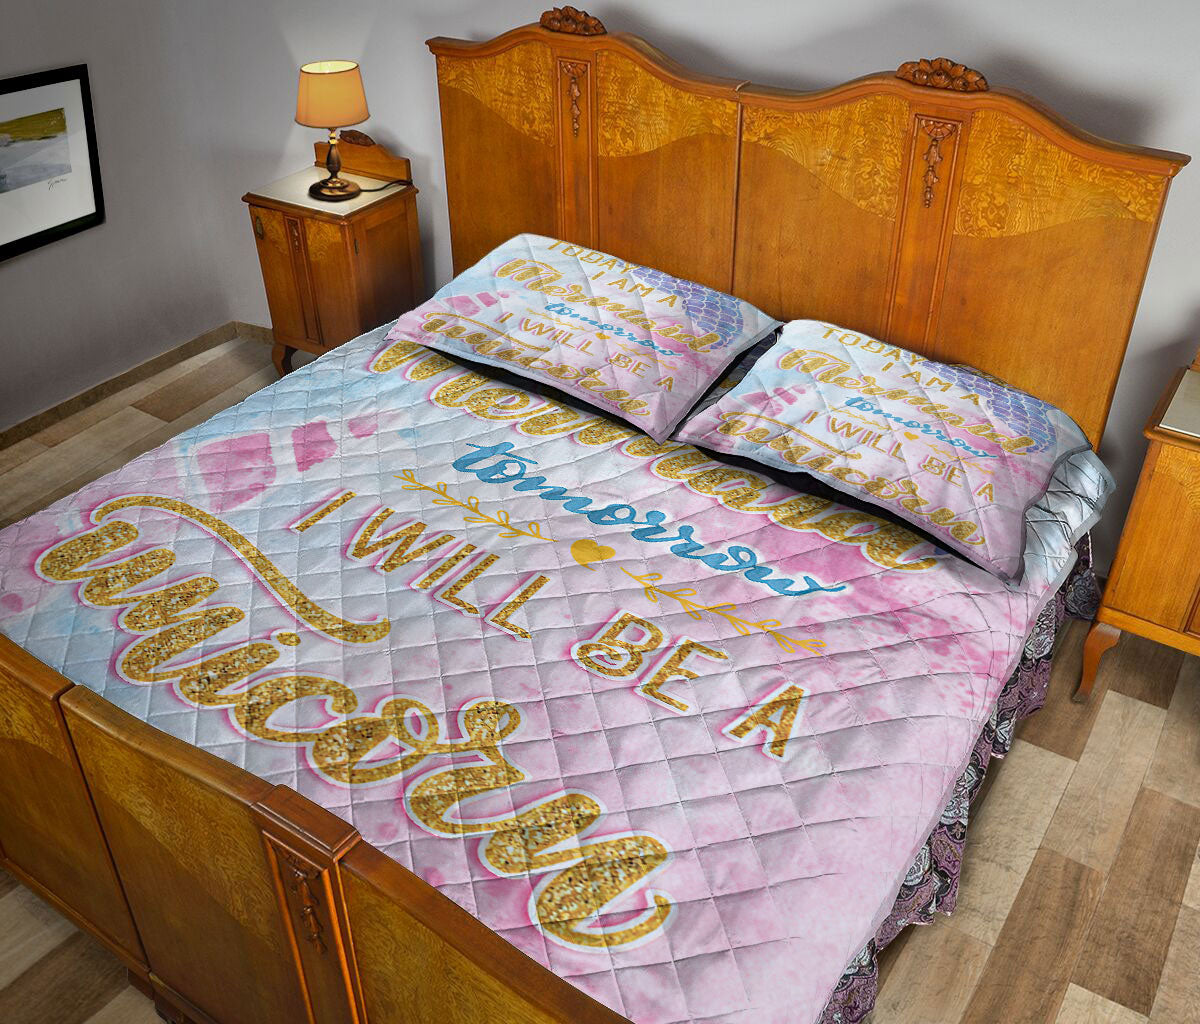 Ohaprints-Quilt-Bed-Set-Pillowcase-Sea-Ocean-Beach-Mermaid-Tail-Unicorn-Lover-Gift-Pink-Blanket-Bedspread-Bedding-2686-Queen (80'' x 90'')